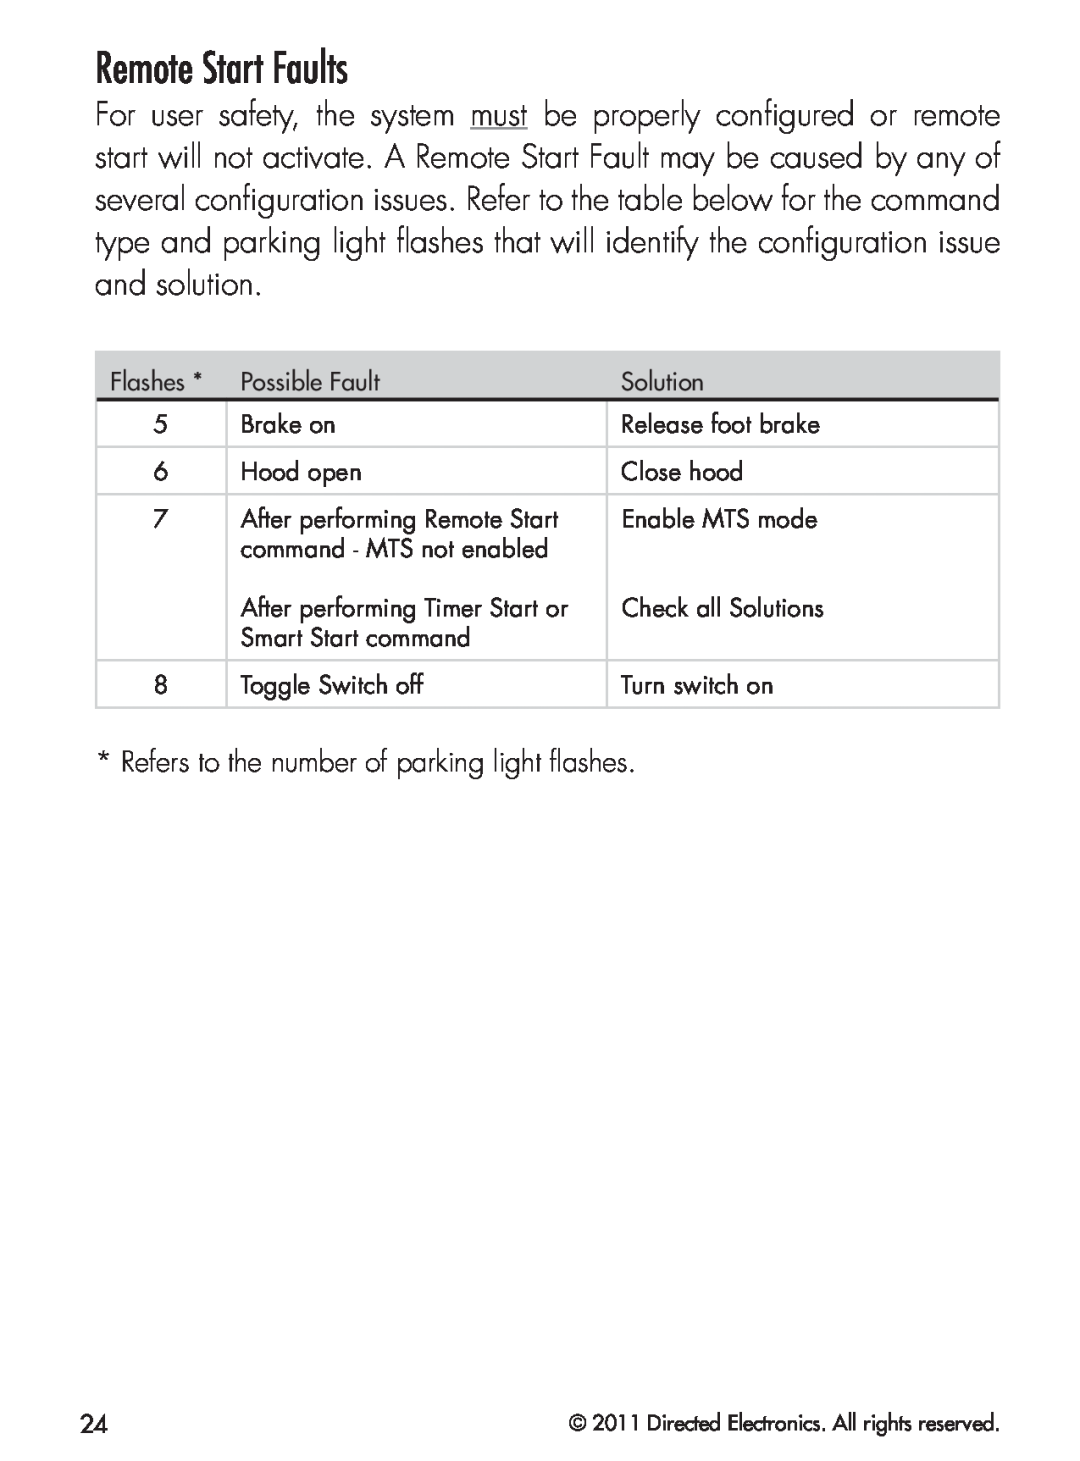 Python 424 manual Remote Start Faults, Refers to the number of parking light ﬂashes 